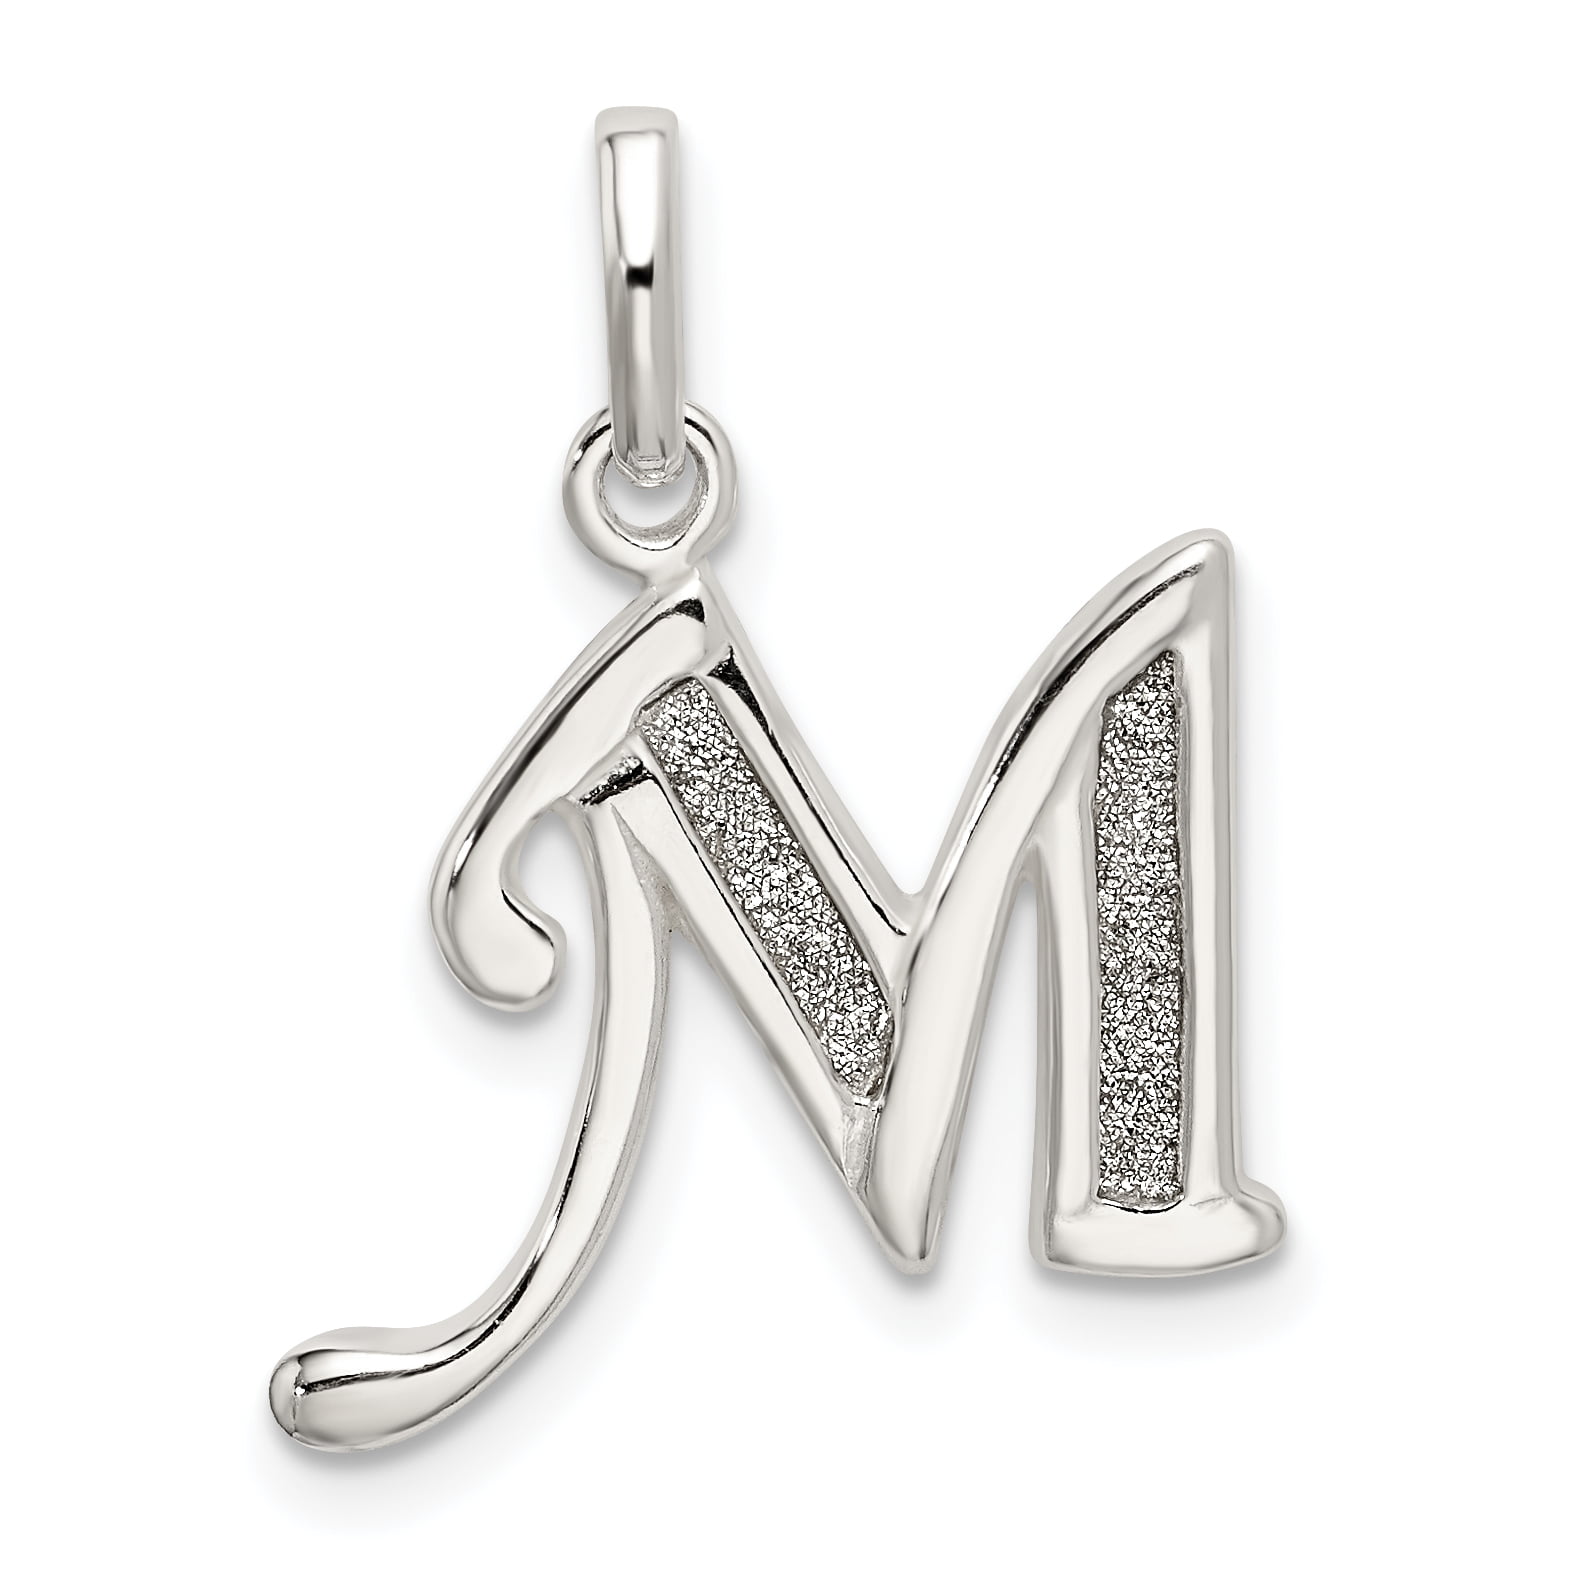 NEONBLOND Personalized Name Engraved Monogram M Pink Grey Chevron Dogtag Necklace